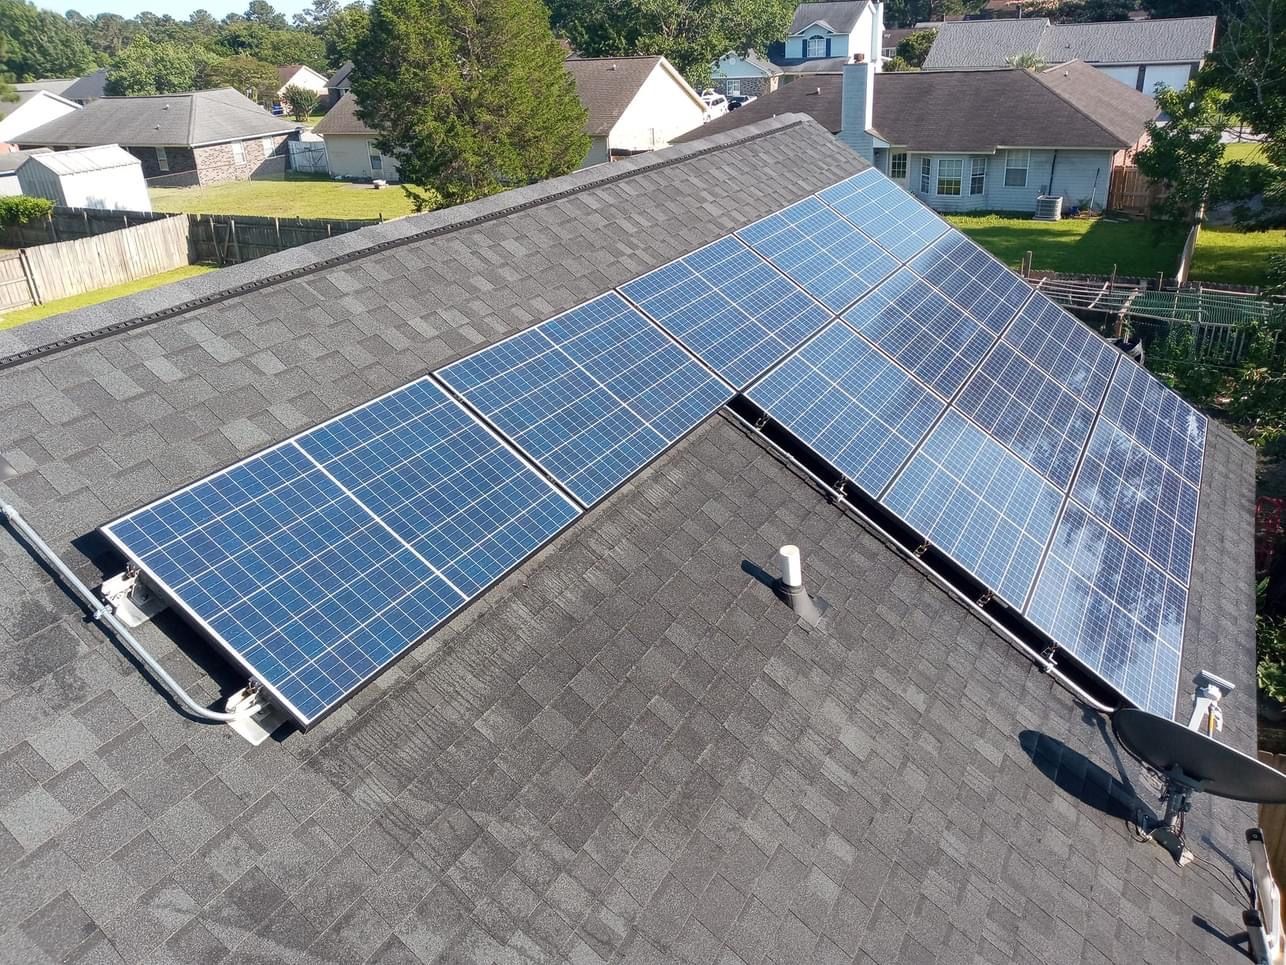 Sparkling clean solar panels after professional cleaning service in Yorba Linda